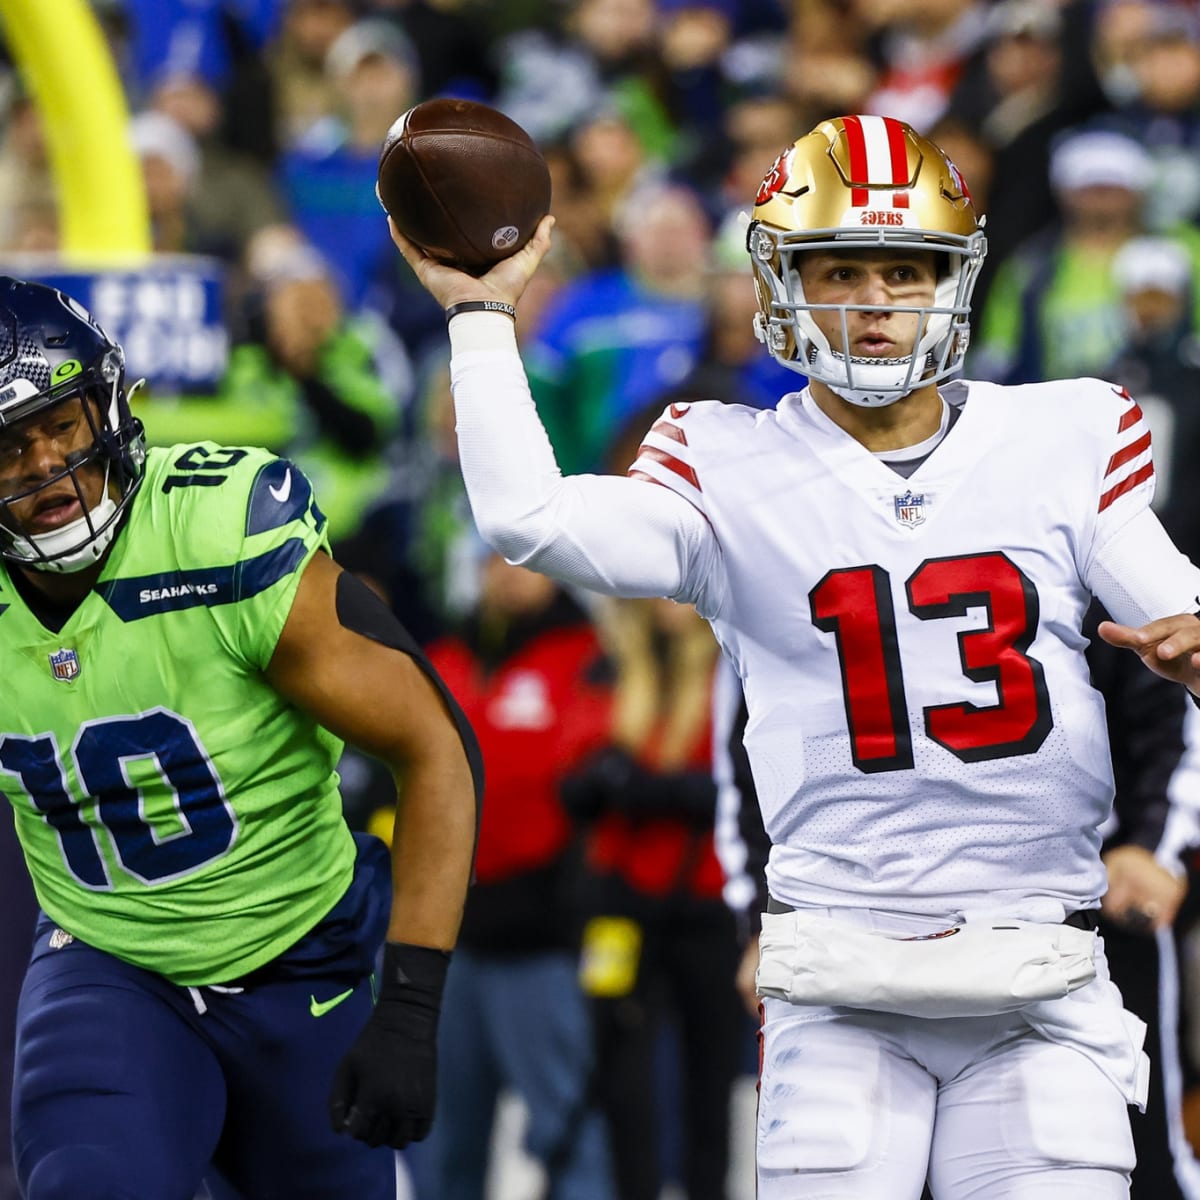 NFL Schedule Release: 49ers Favored to Repeat as NFC West